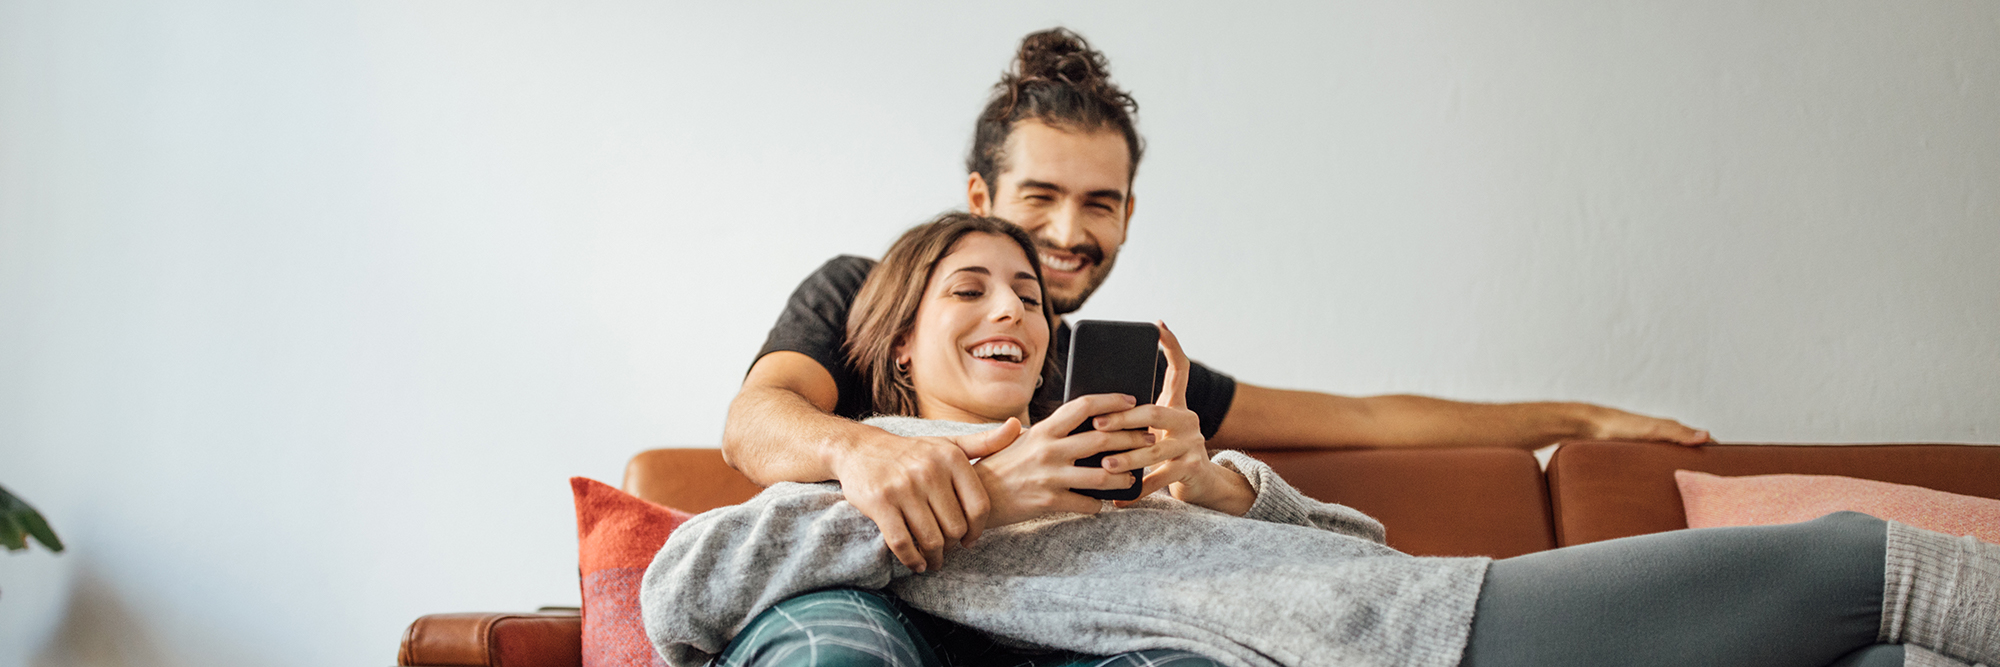 young woman laying on a sofa with a young man behind her both smiling looking at her smartphone  | Digital Wings blog | What is streaming